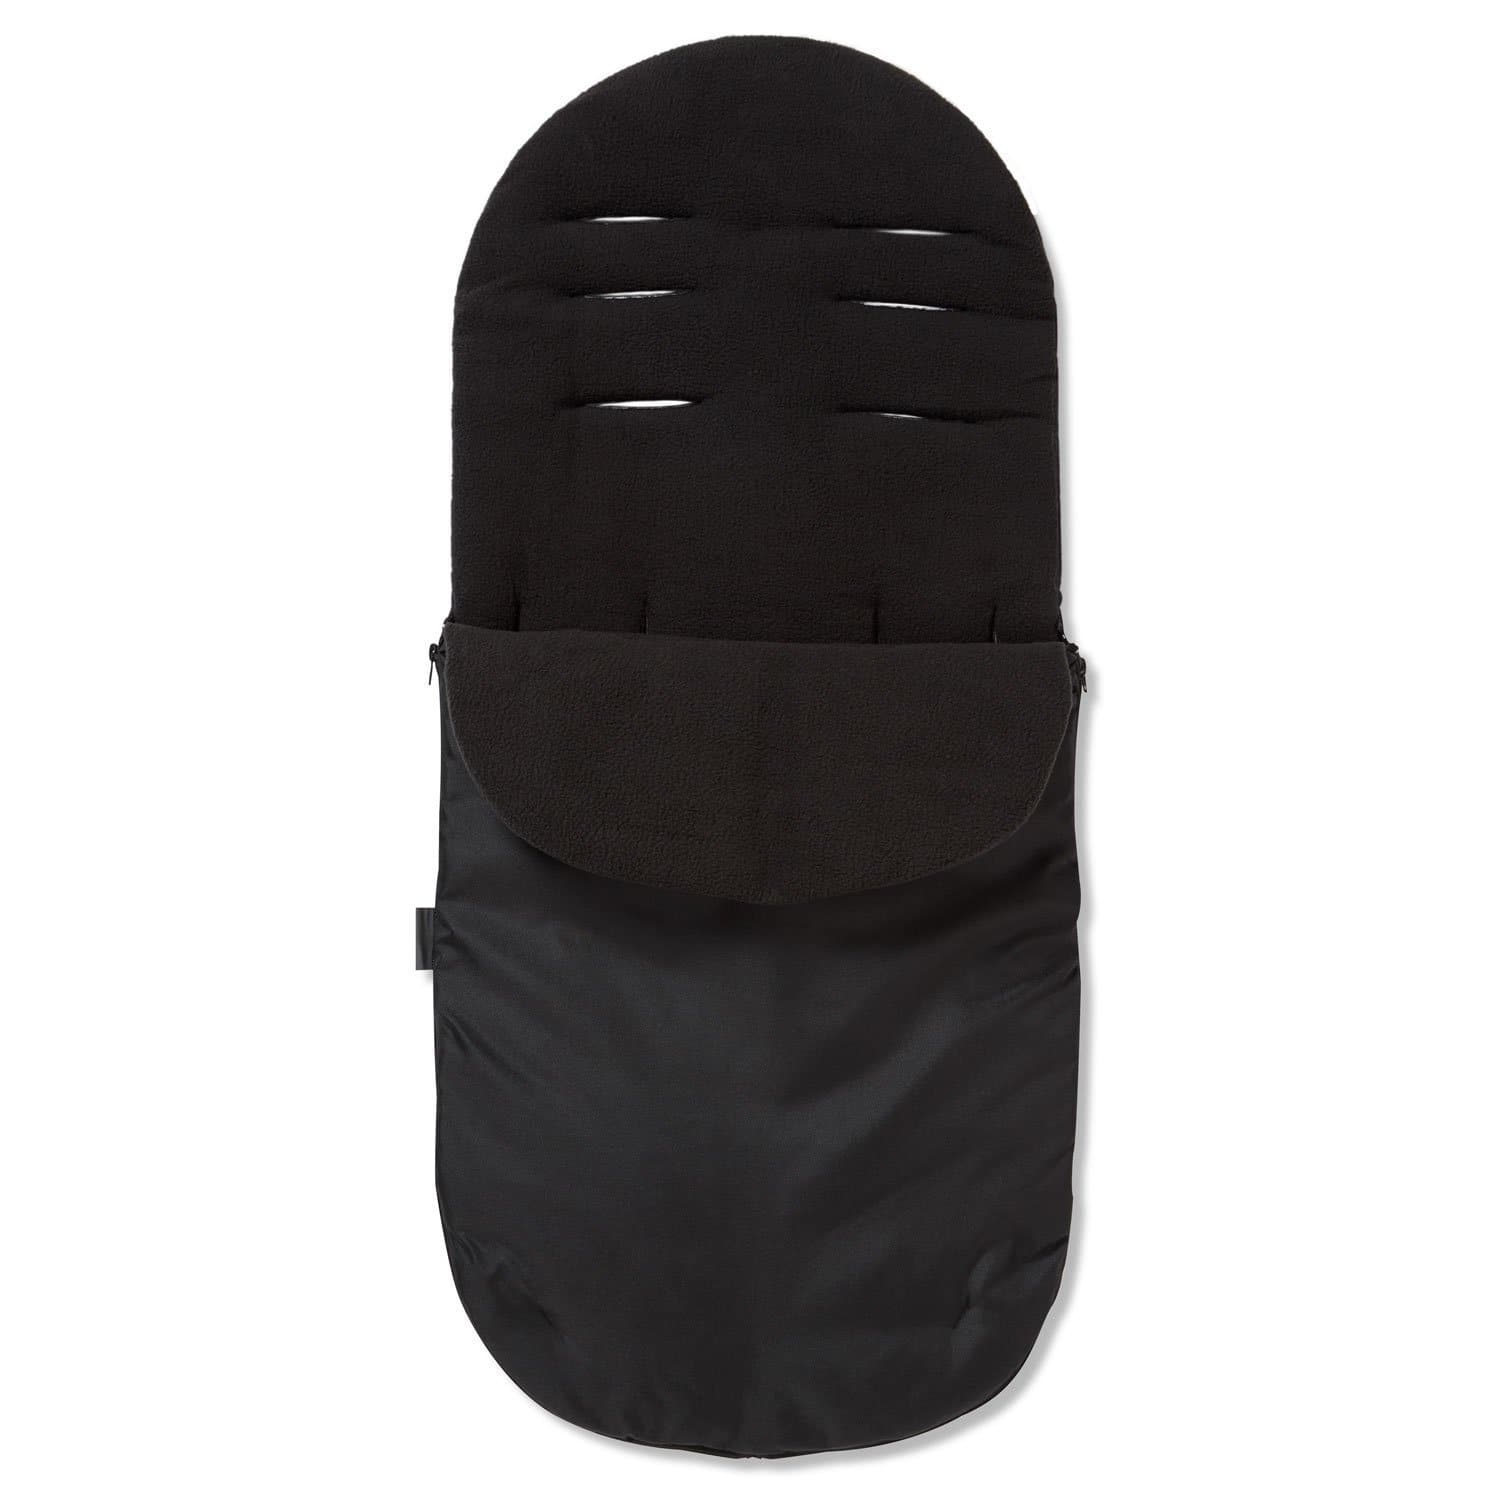 Footmuff / Cosy Toes Compatible with Kiddicare.com - Black / Fits All Models | For Your Little One